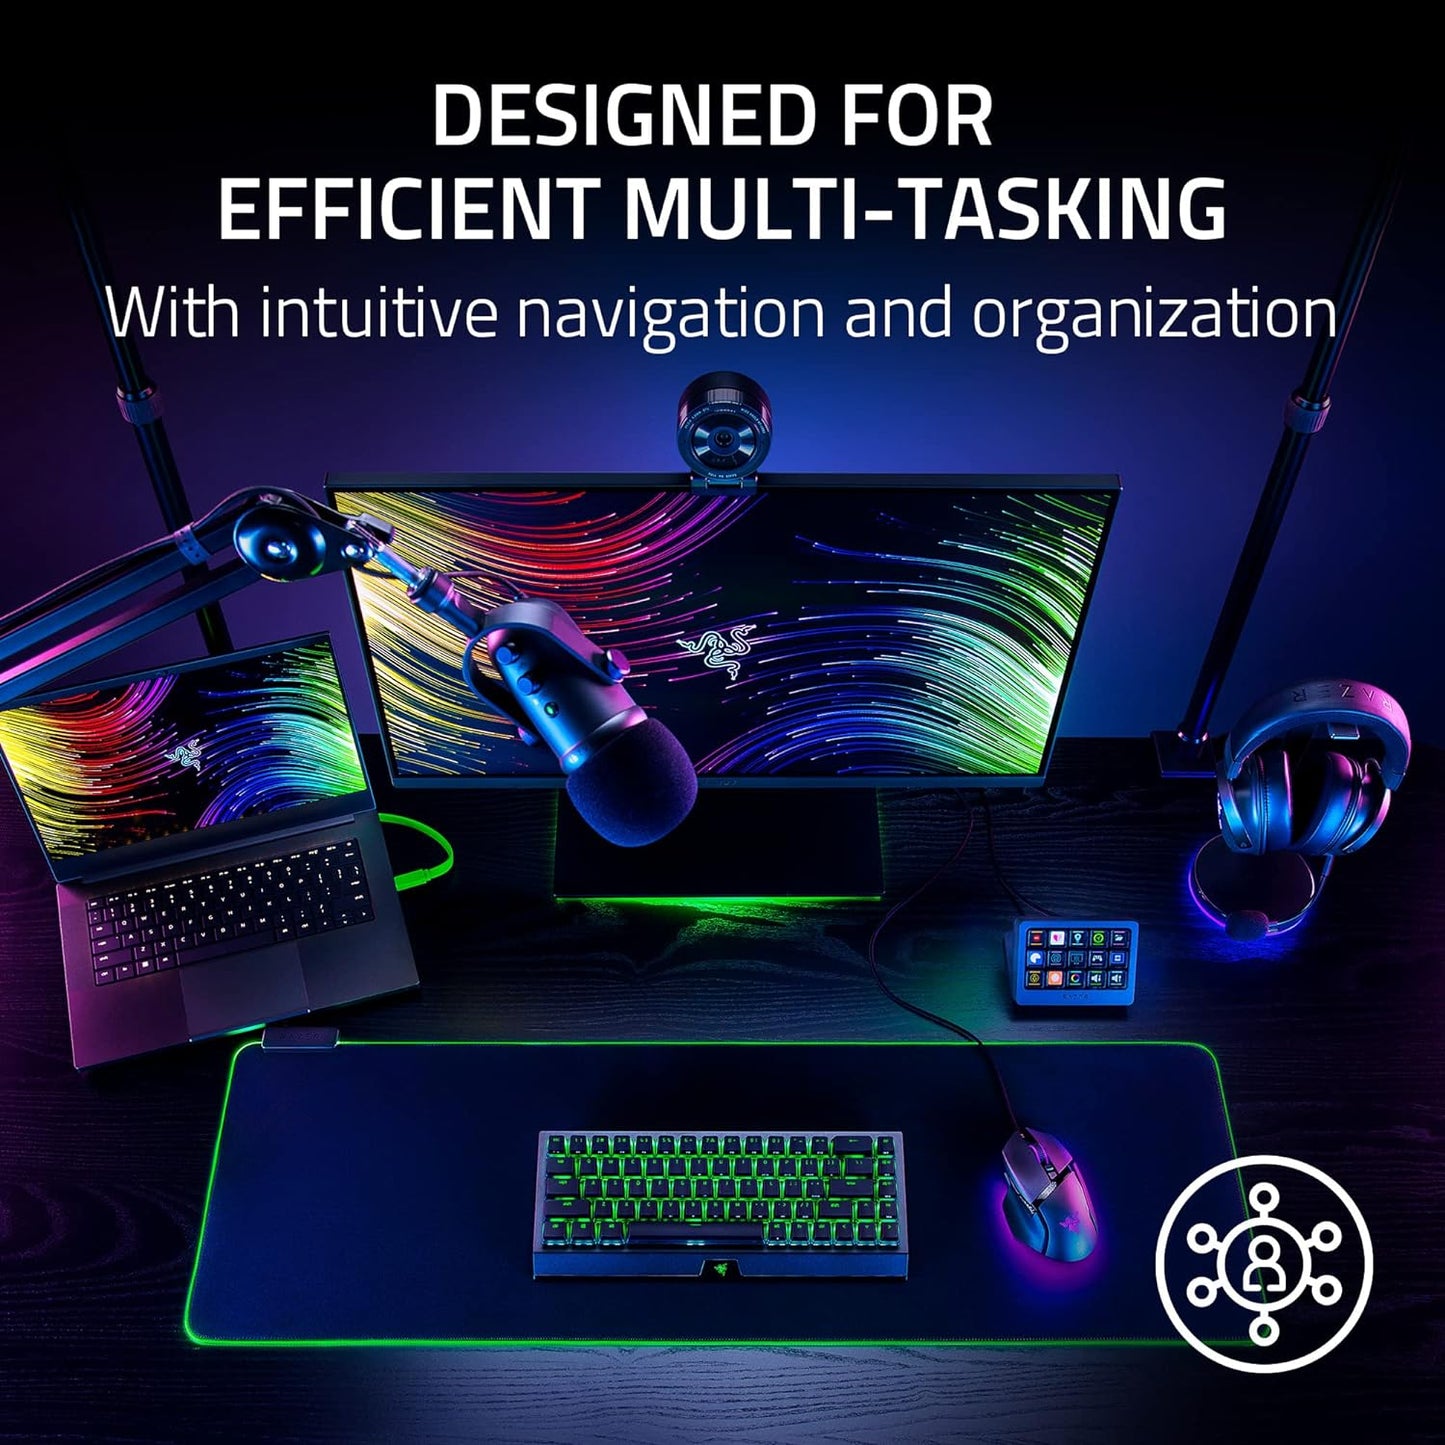 Razer Stream Controller: All-in-one Keypad for Streaming - 12 Haptic Switchblade Keys - 6 Tactile Analog Dials - 8 Programmable Buttons - Designed for Efficient Multi-Tasking